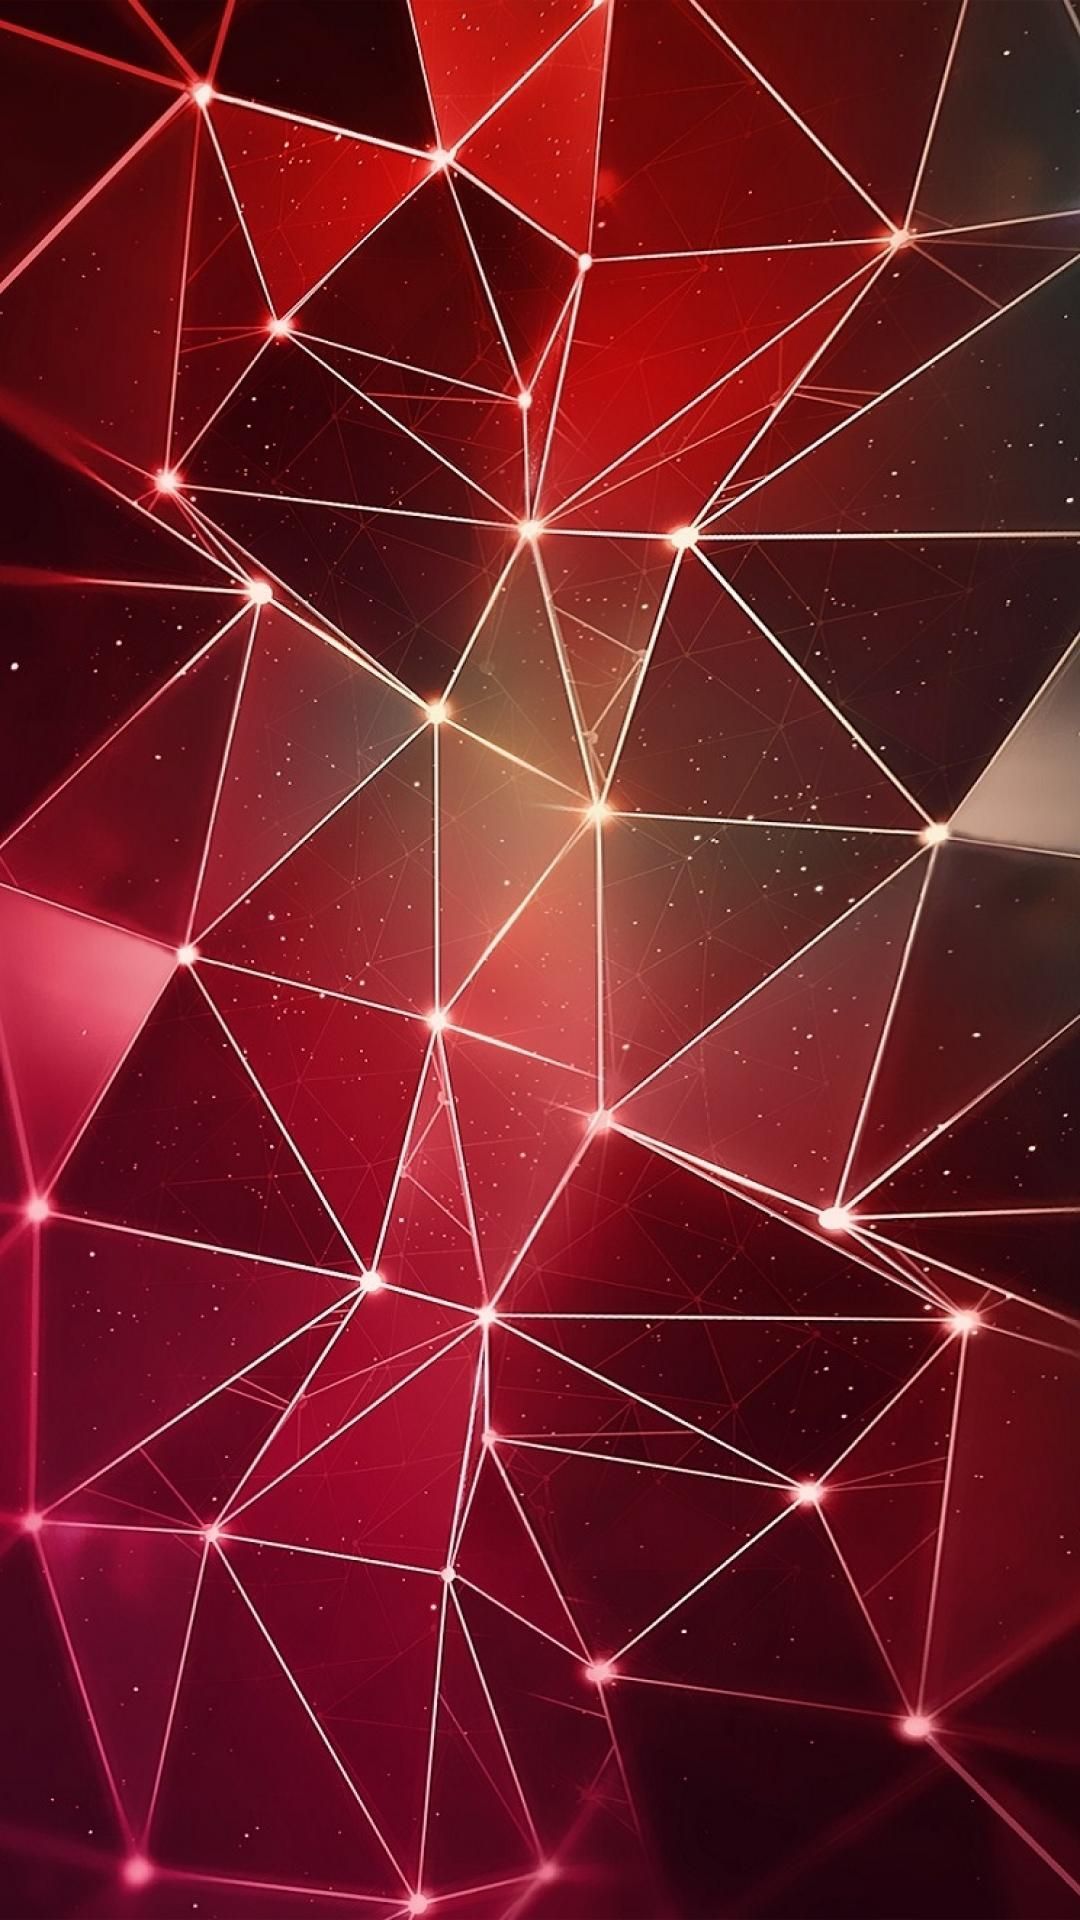 The #iPhone Retina #Wallpaper I like in #red!. Abstract iphone